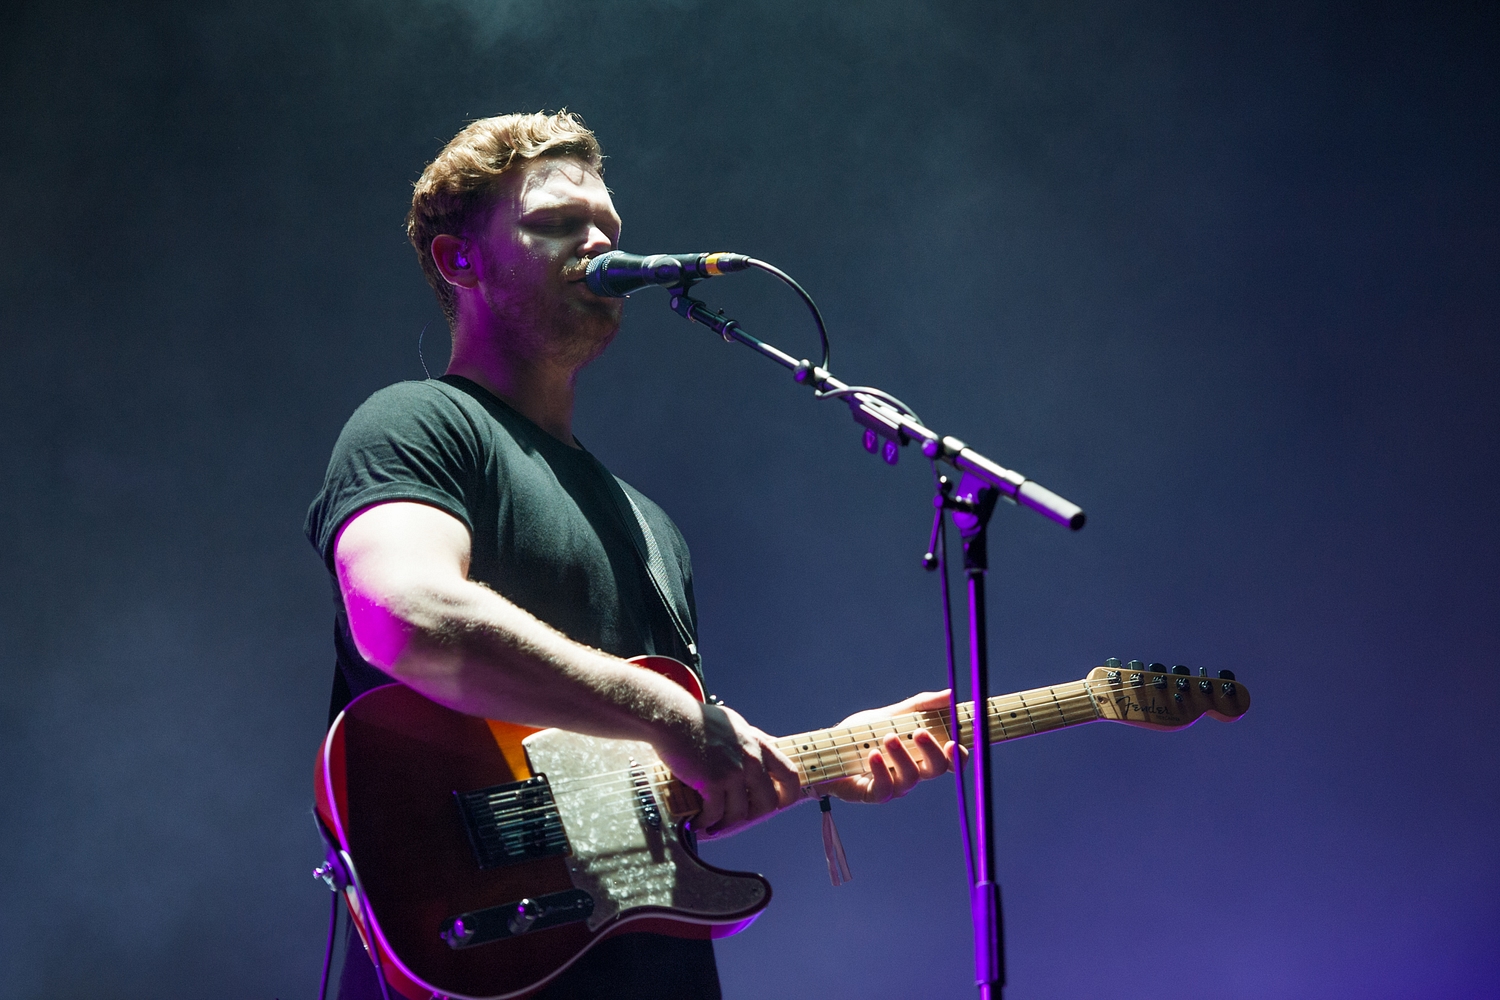 Alt-J, Caribou and Wild Beasts to play day one of Latitude 2015